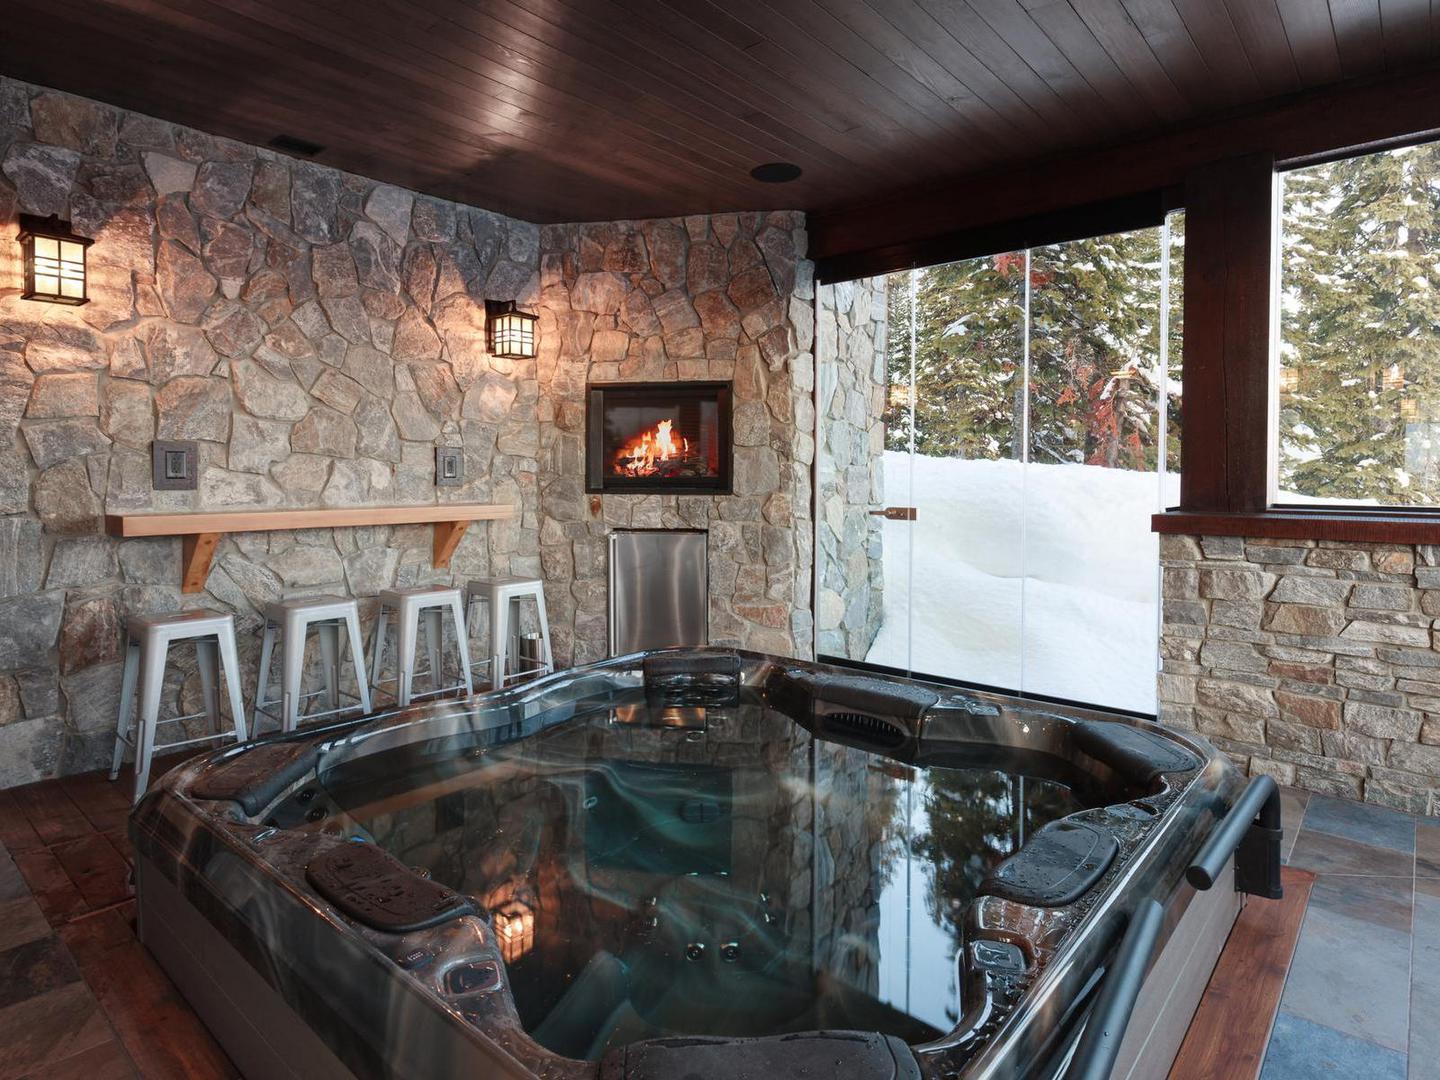 A luxury private hot tub with beautiful stonework and view at Big White Ski Resort.